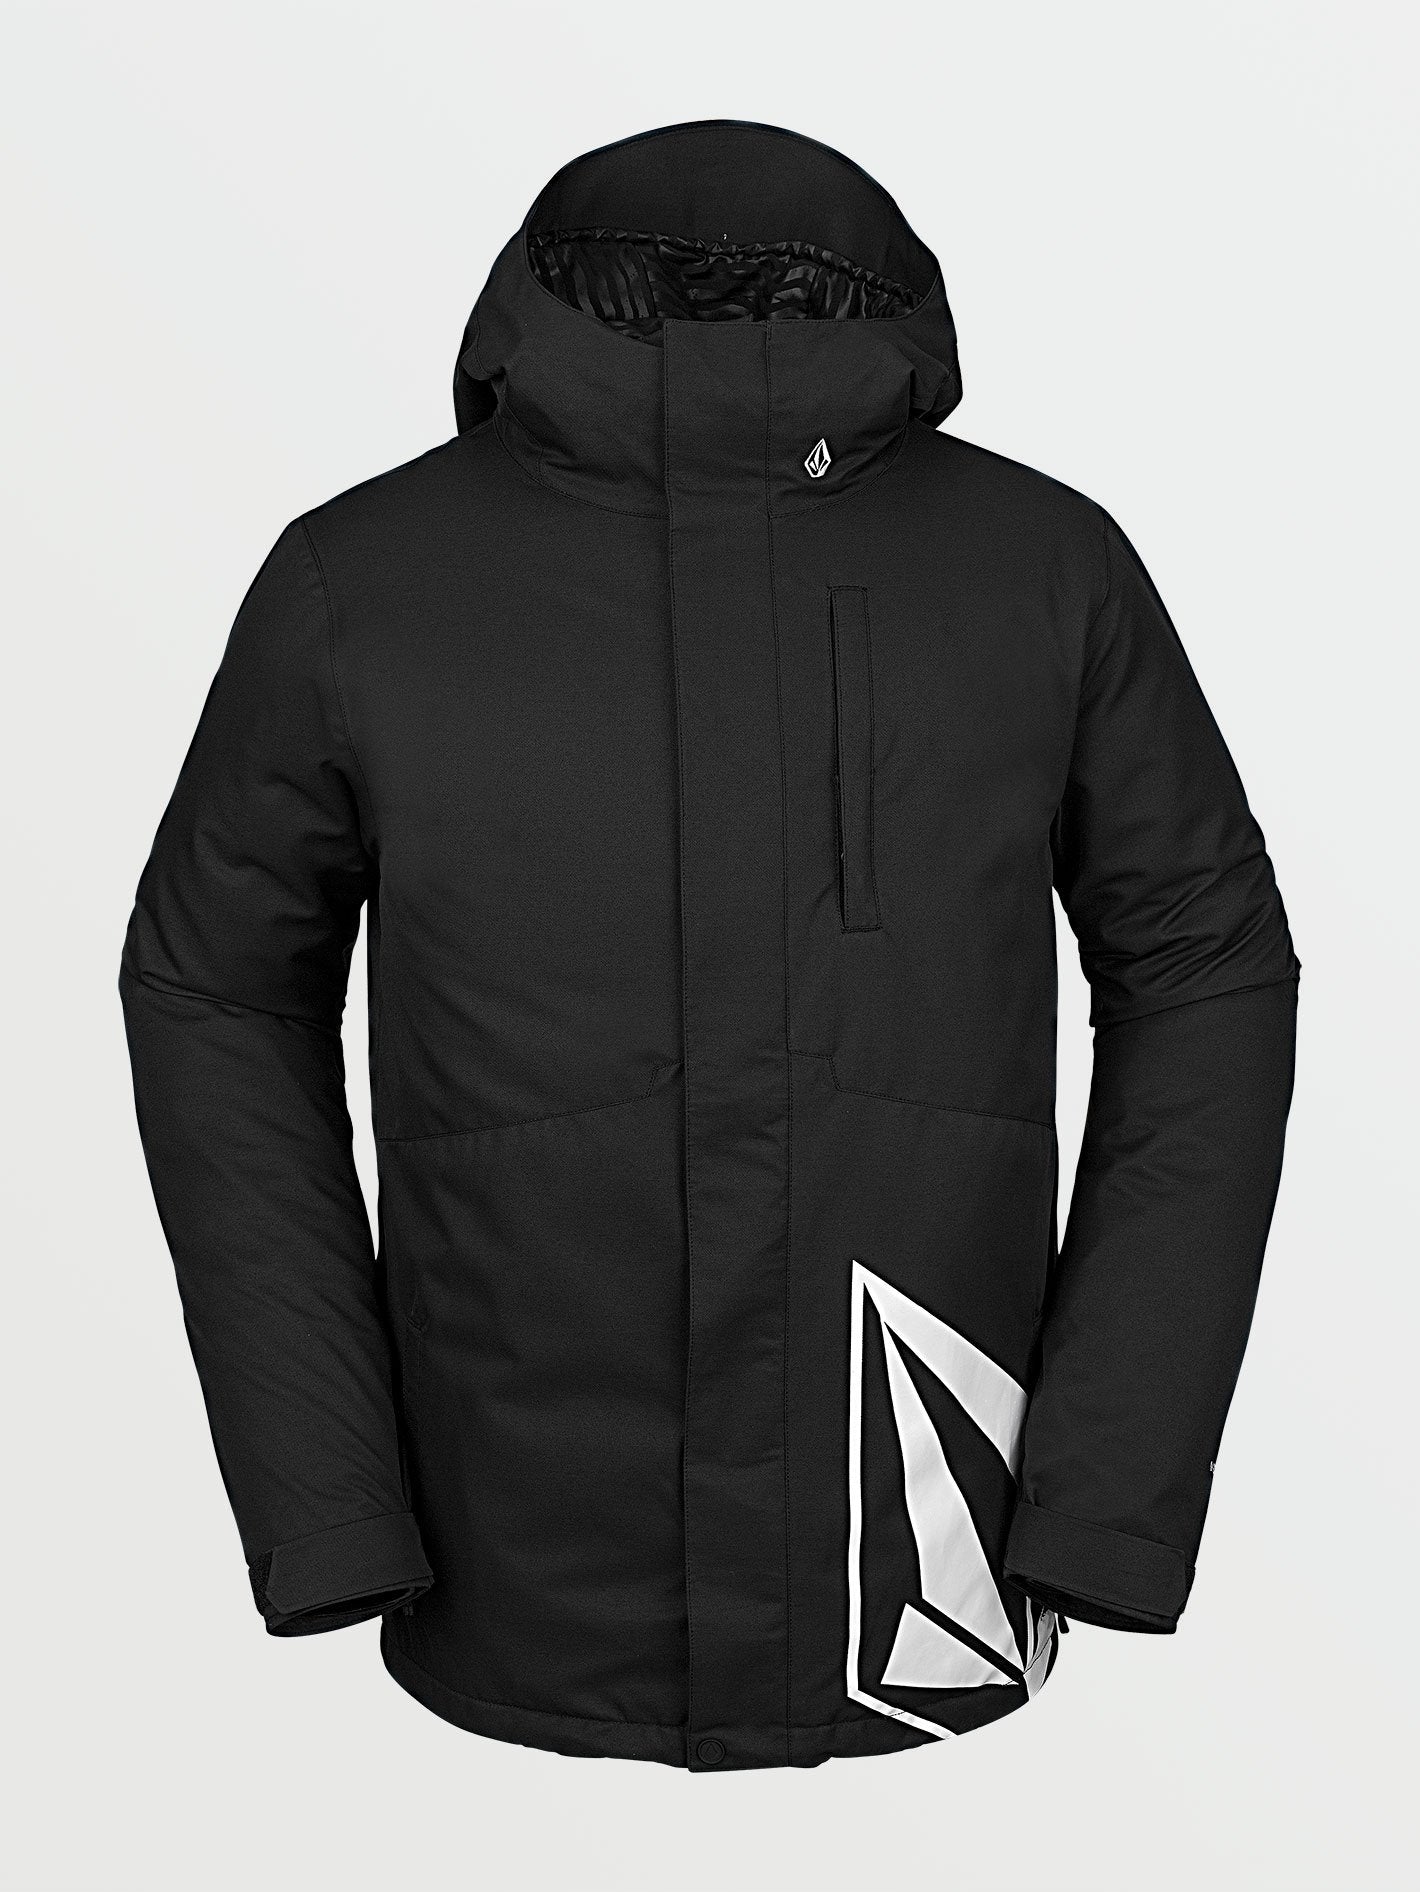 17Forty Insulated Jacket - BLACK